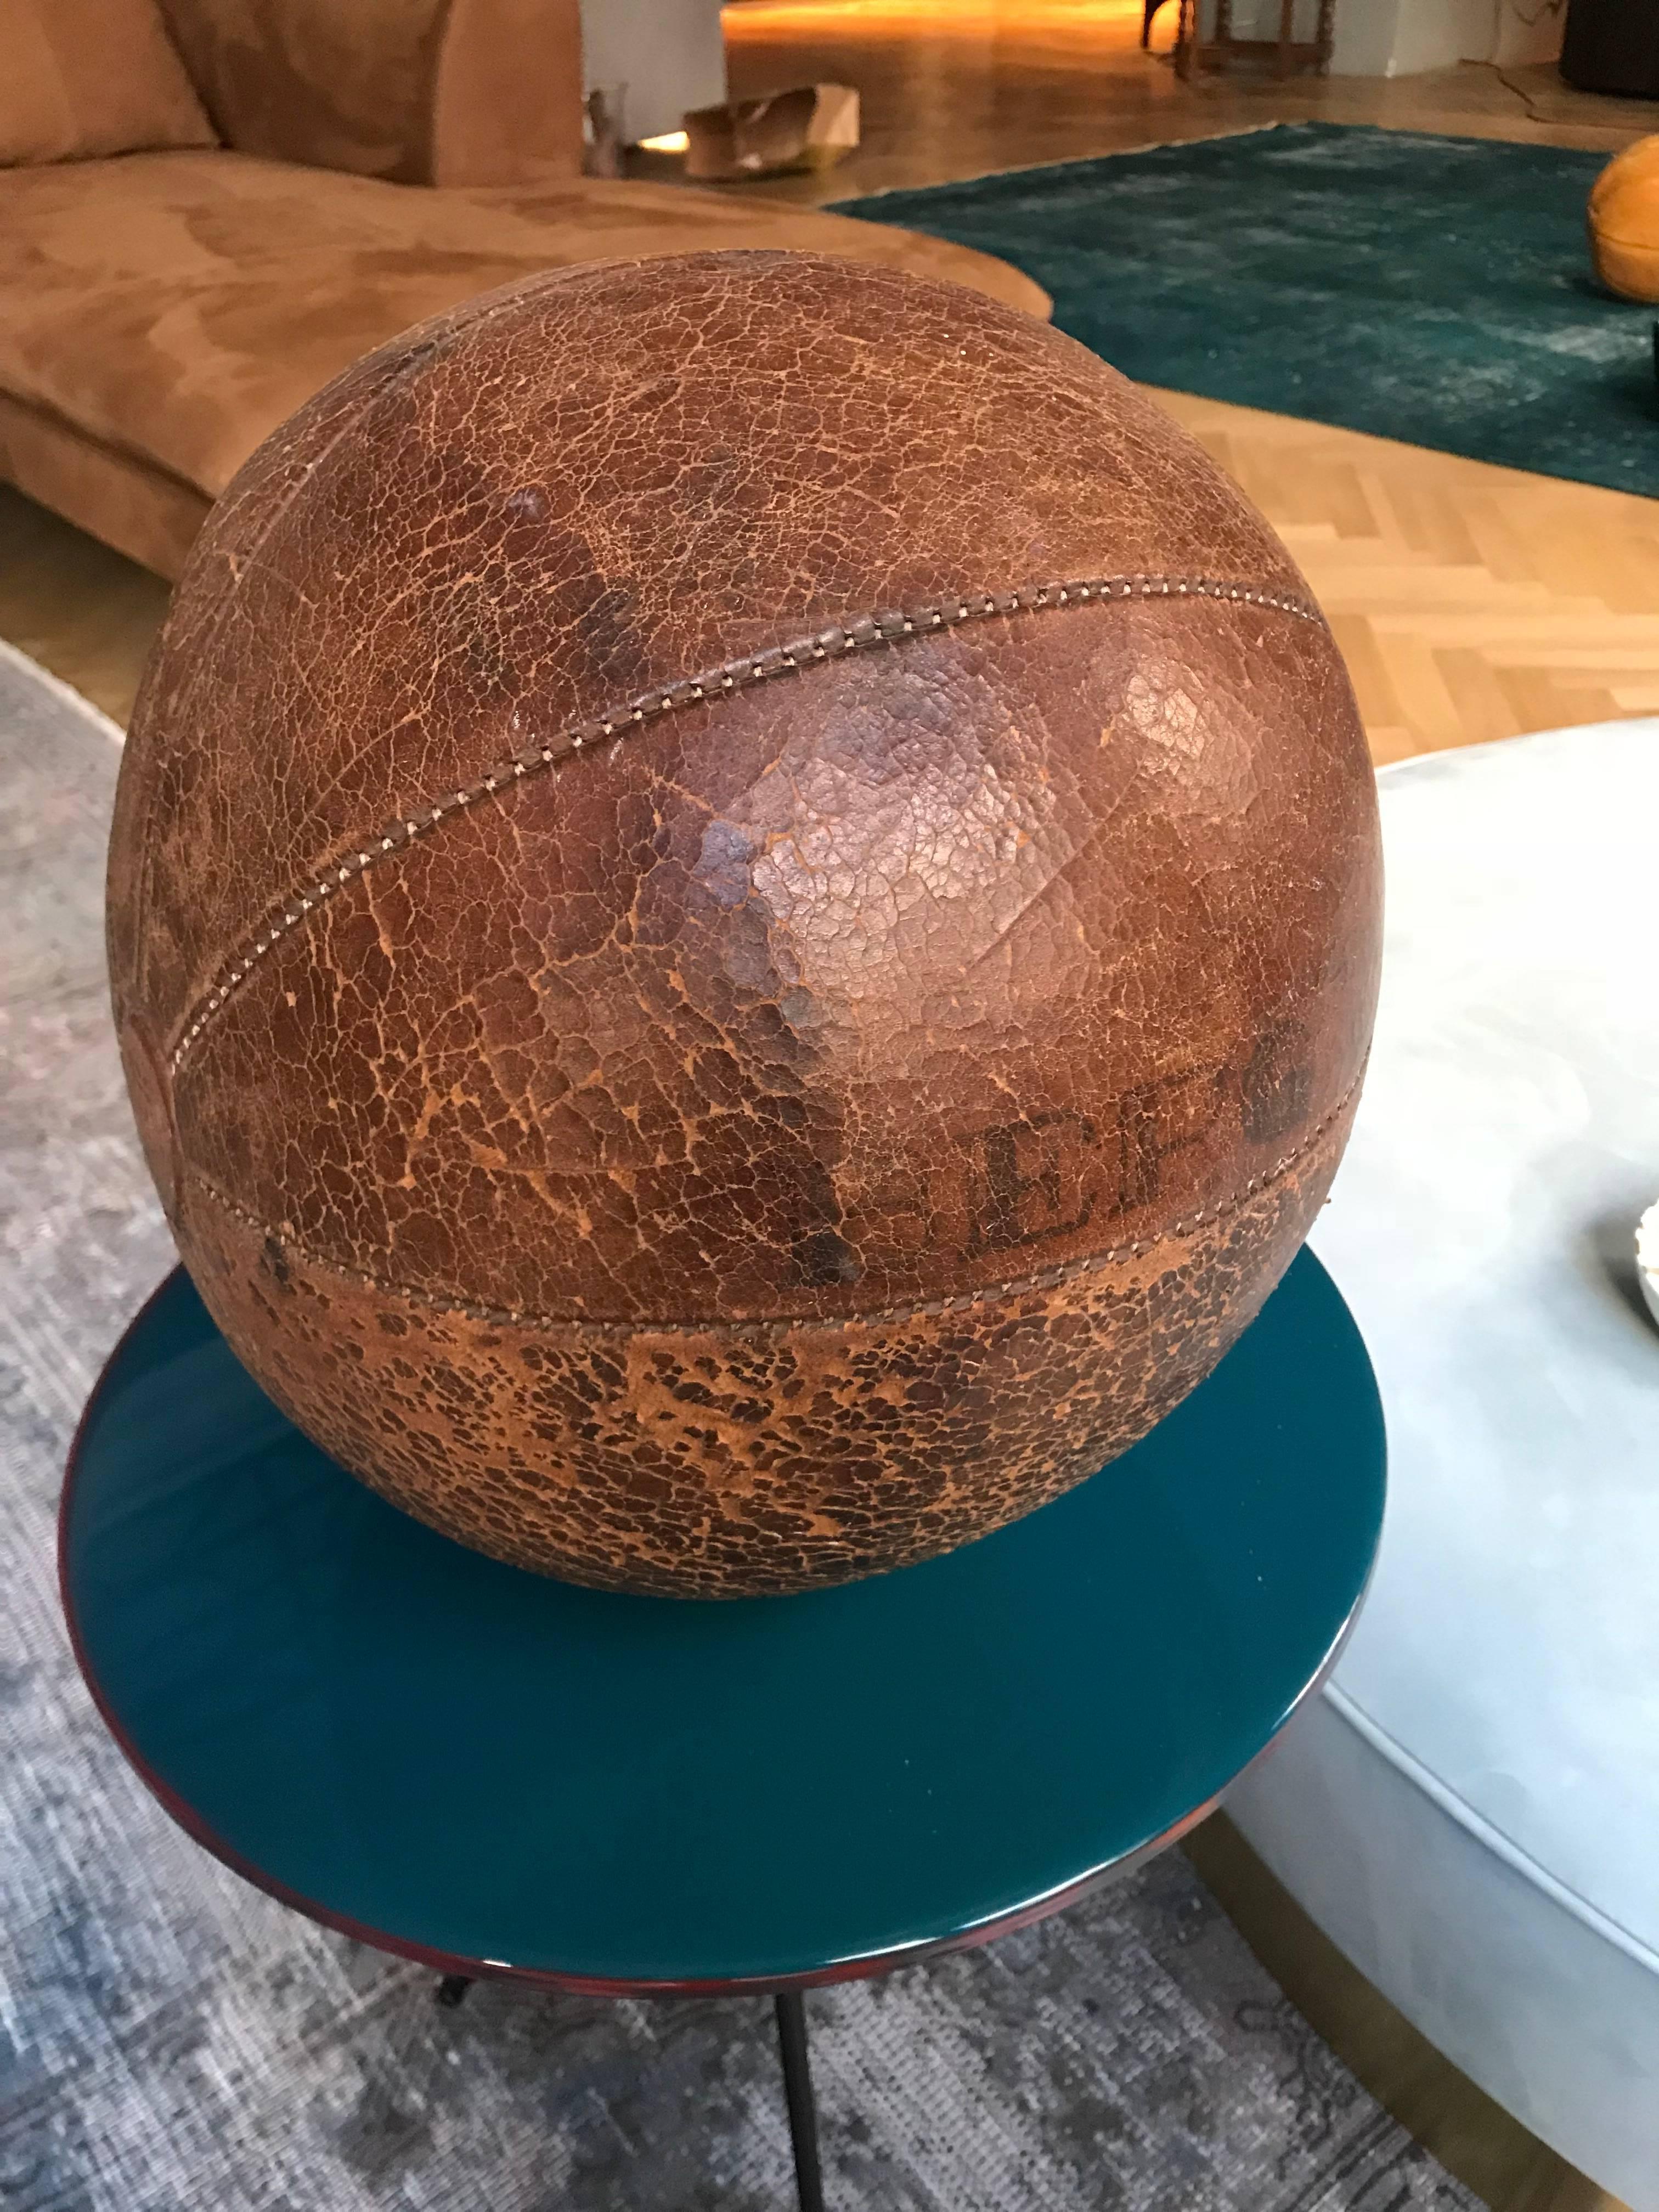 Hand-Crafted Berg Vintage Leather Medicine Ball, 1920s Germany